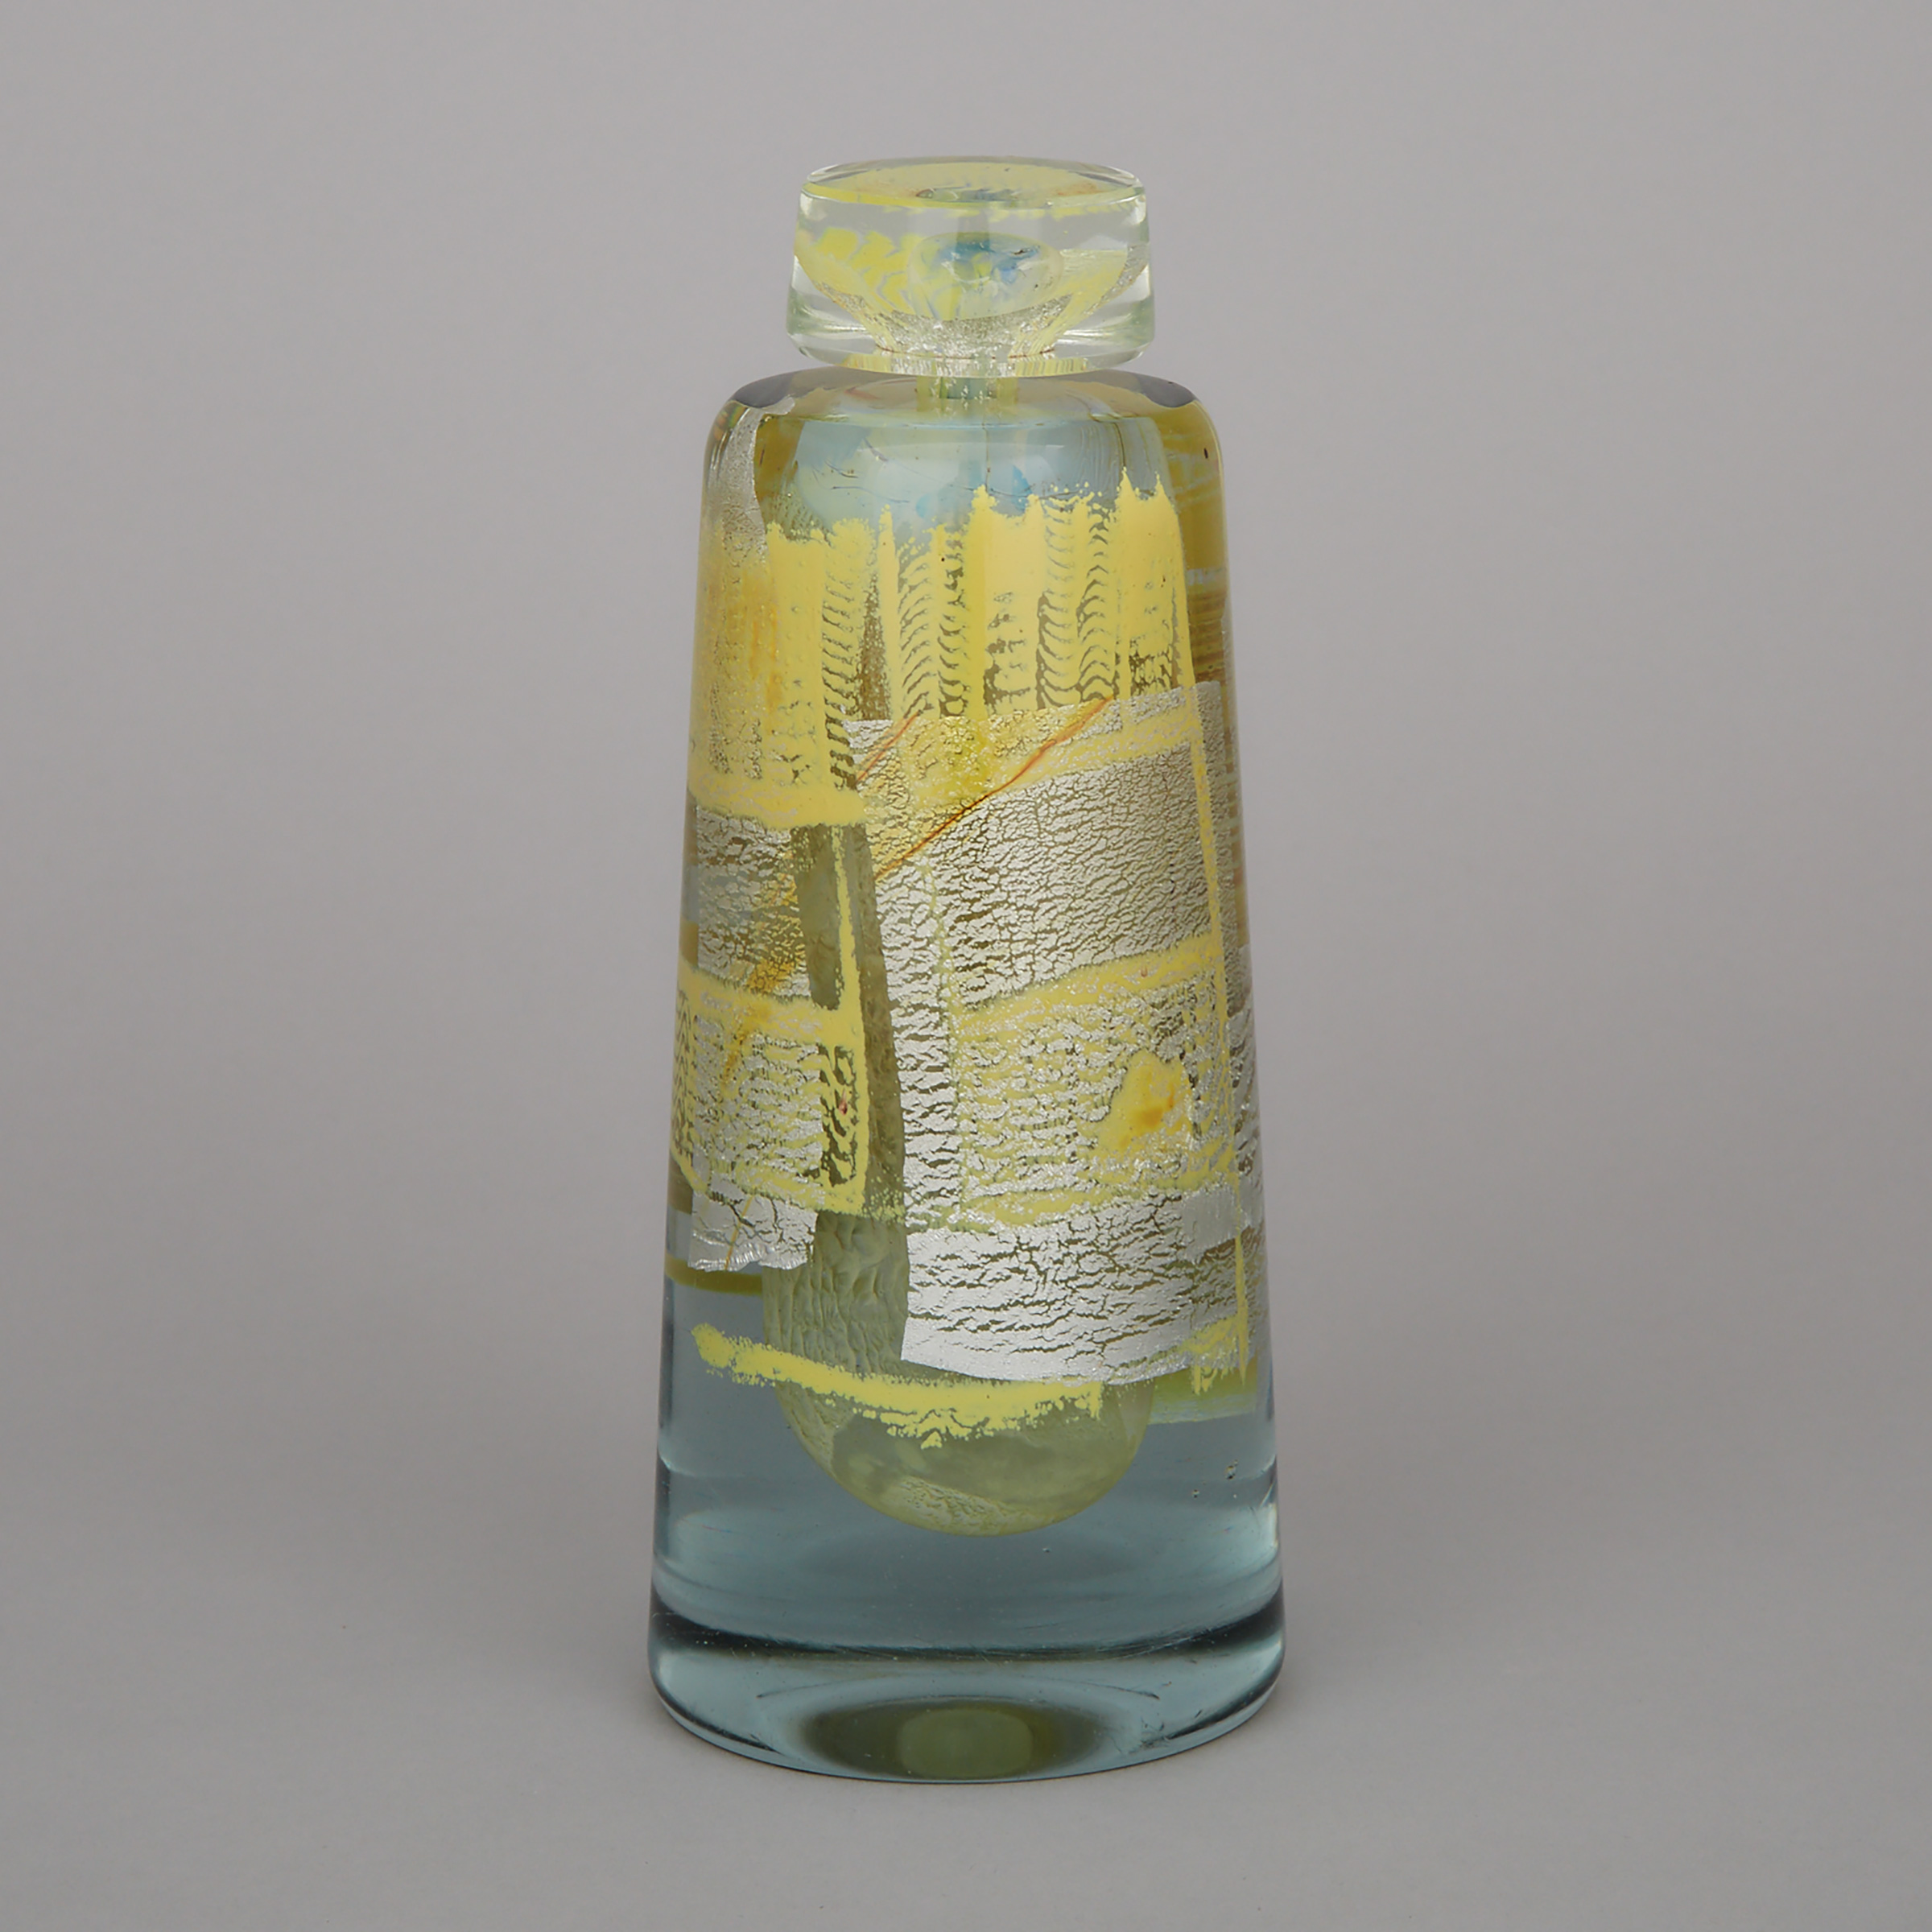 Christopher Ries (American, b.1952), Internally Decorated Glass Bottle with Stopper, 1977